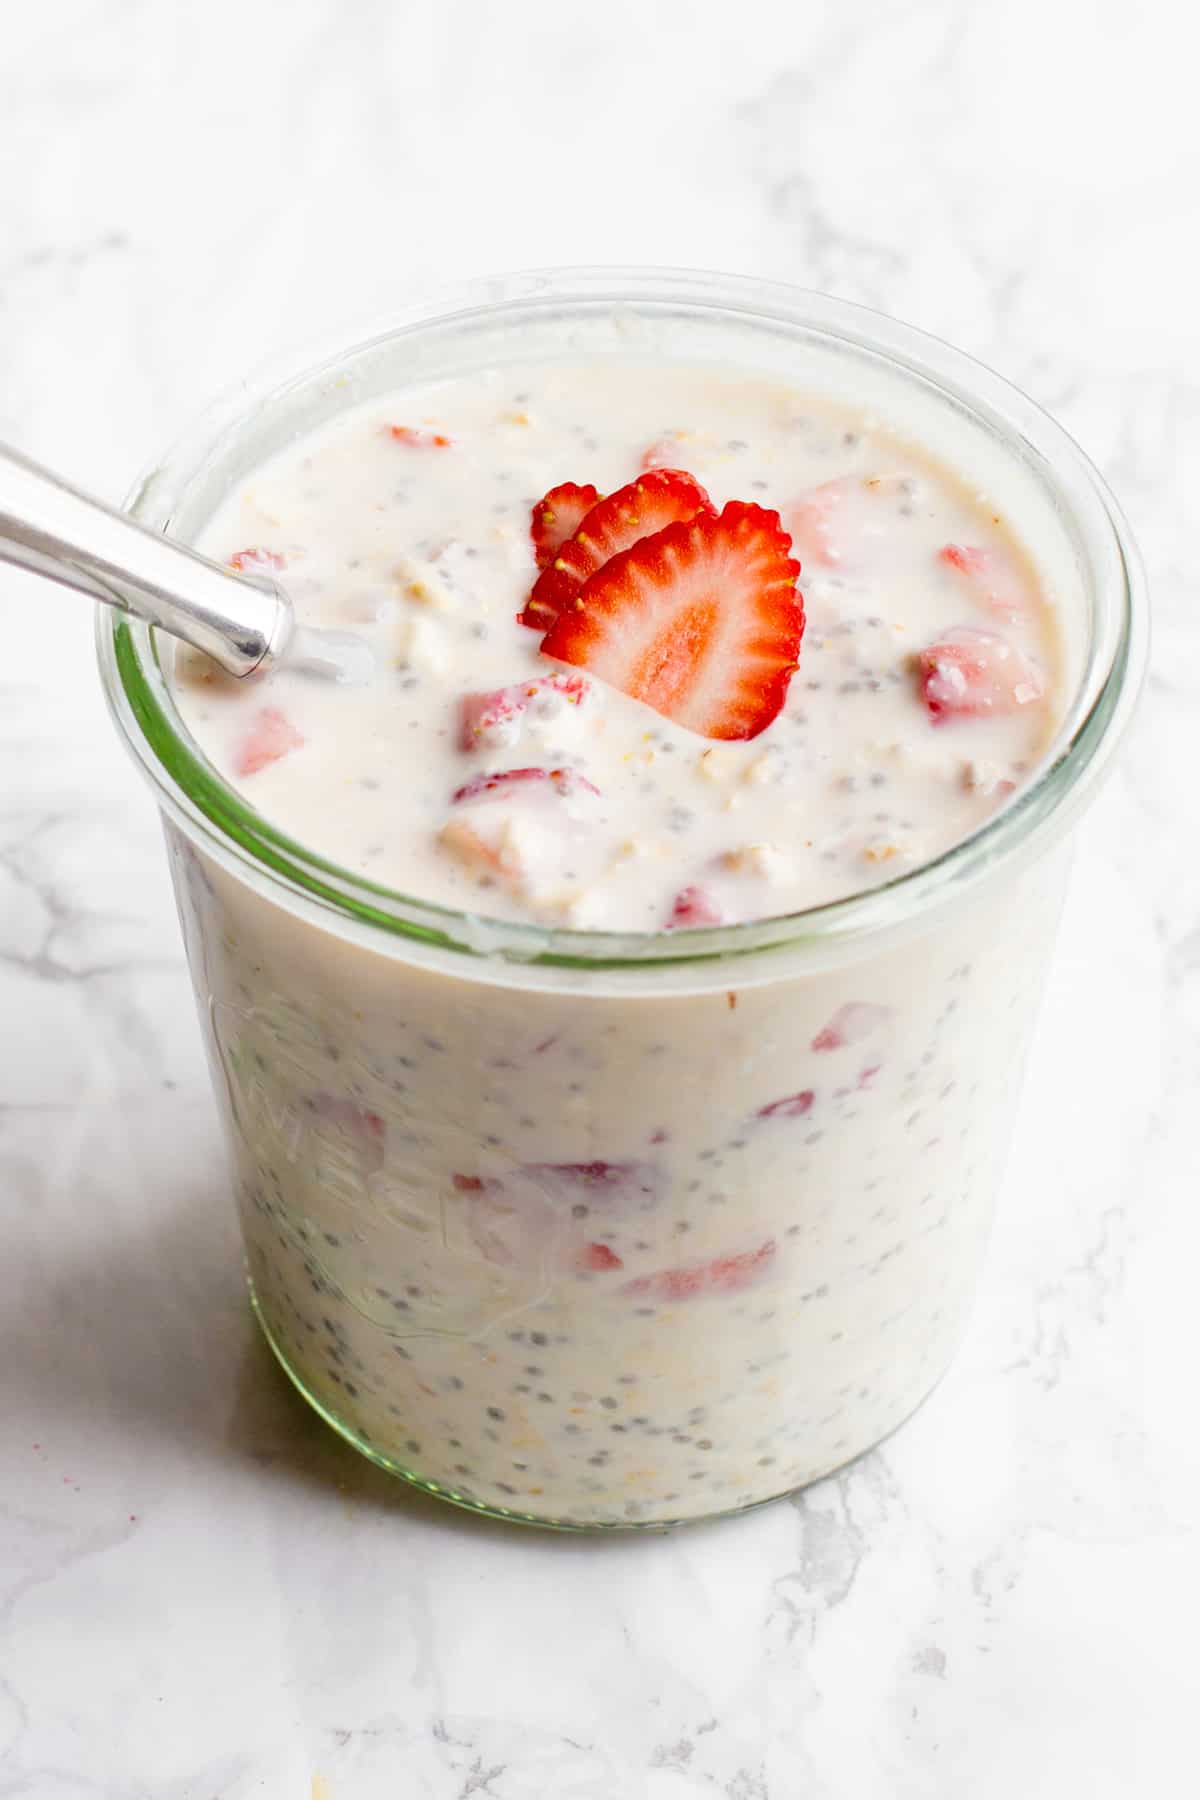 A glass jar filled with strawberry cheesecake overnight oats sits on a marble countertop. The oats are garnished with strawberry slices, and a spoon dips into the jar.